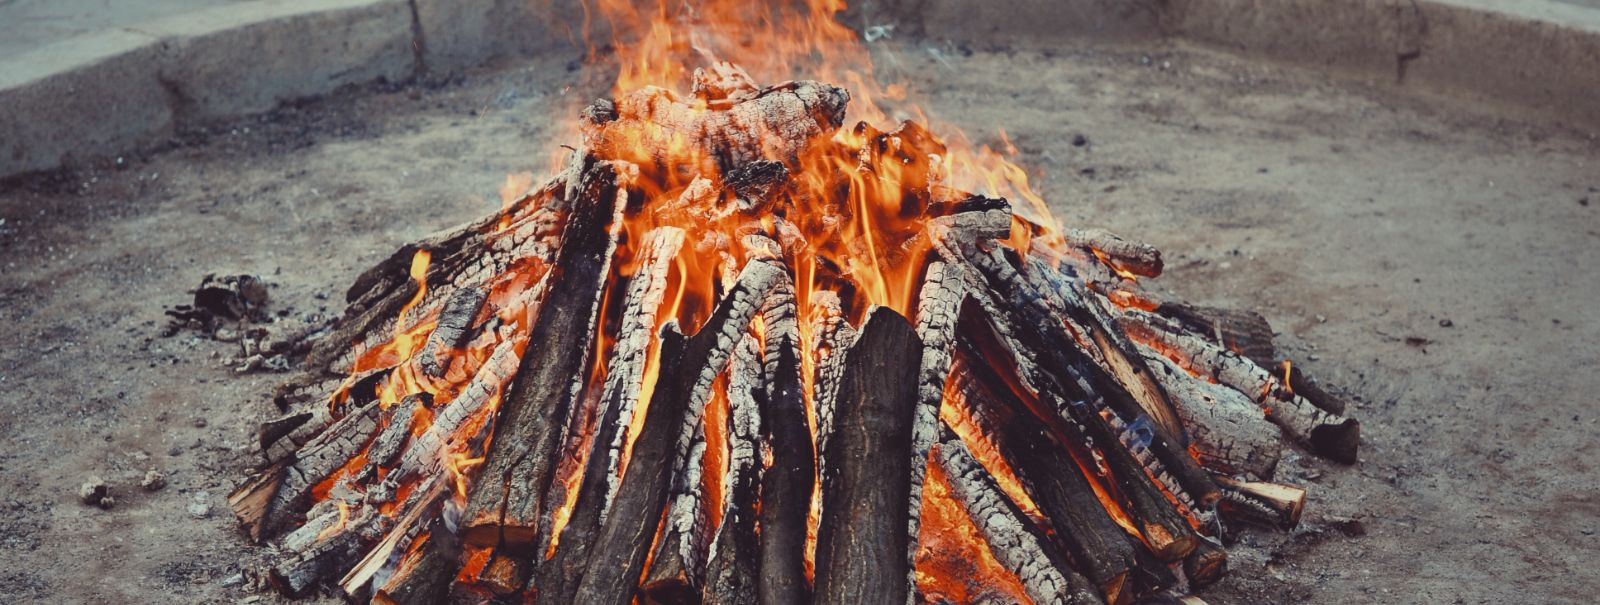 When it comes to creating a cozy and inviting outdoor space, nothing beats the warmth and ambiance of a bonfire. But before you can enjoy those tranquil evening